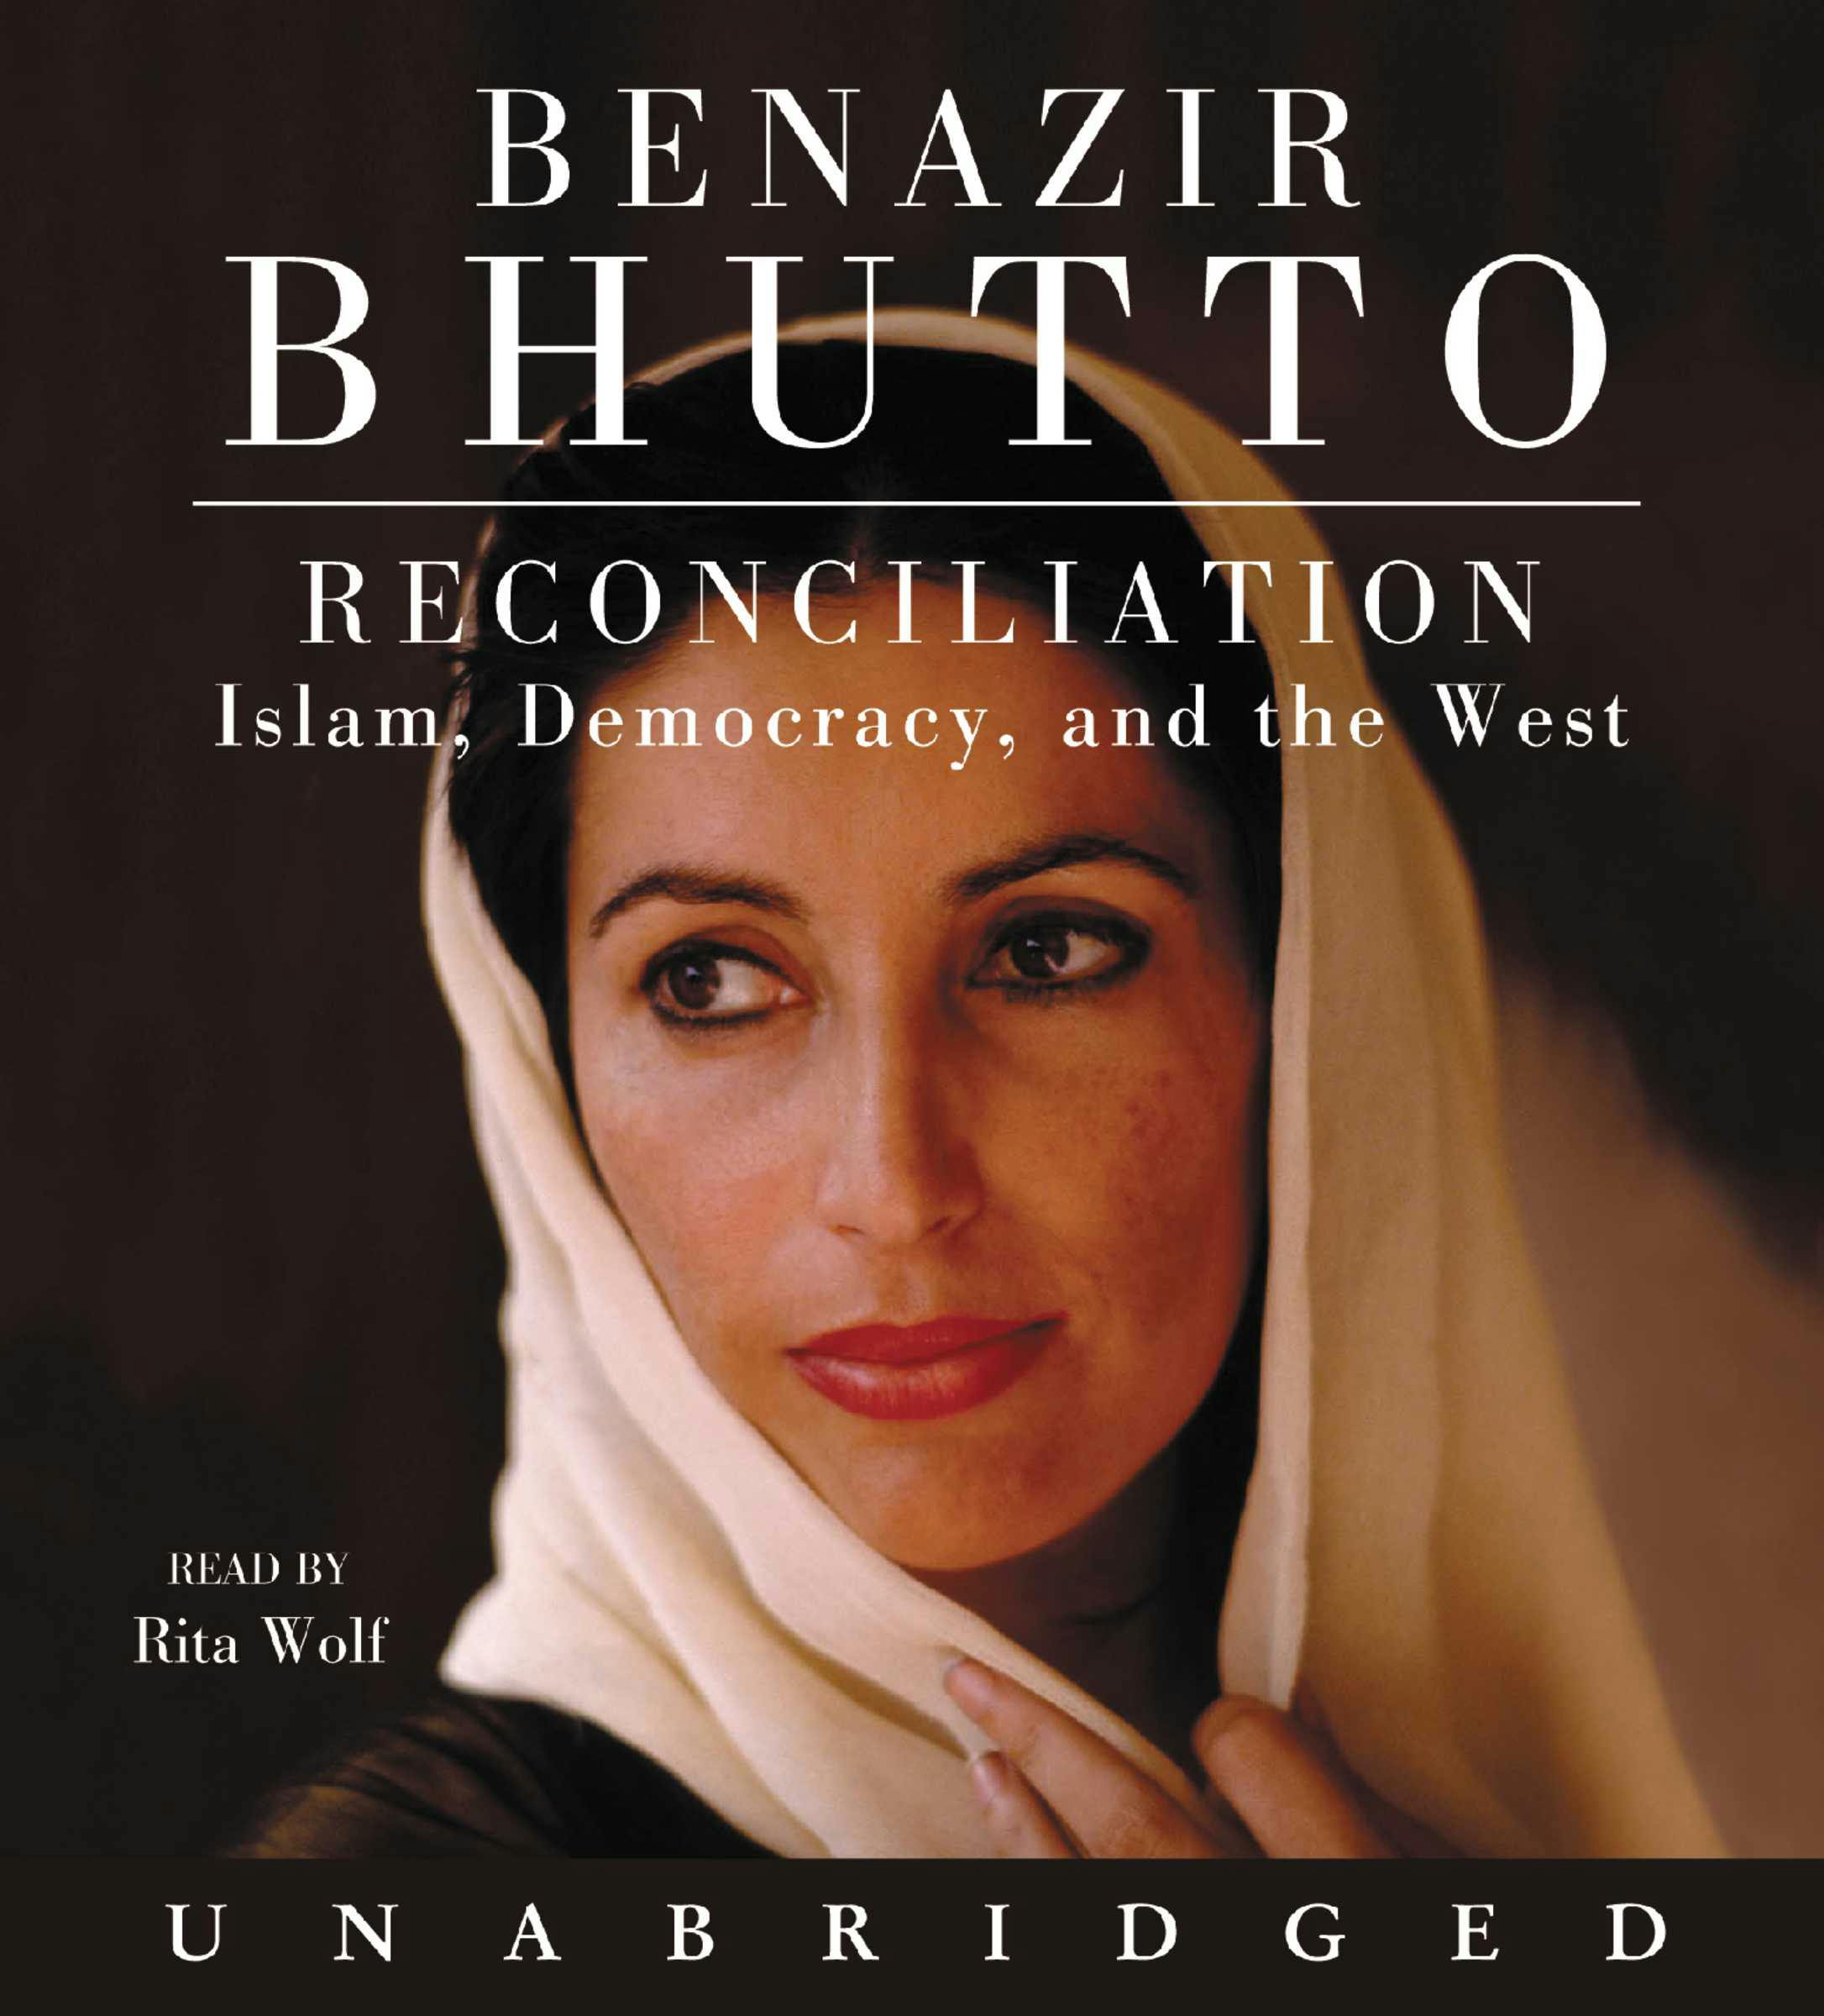 Reconciliation: Islam, Democracy and the West - Benazir Bhutto